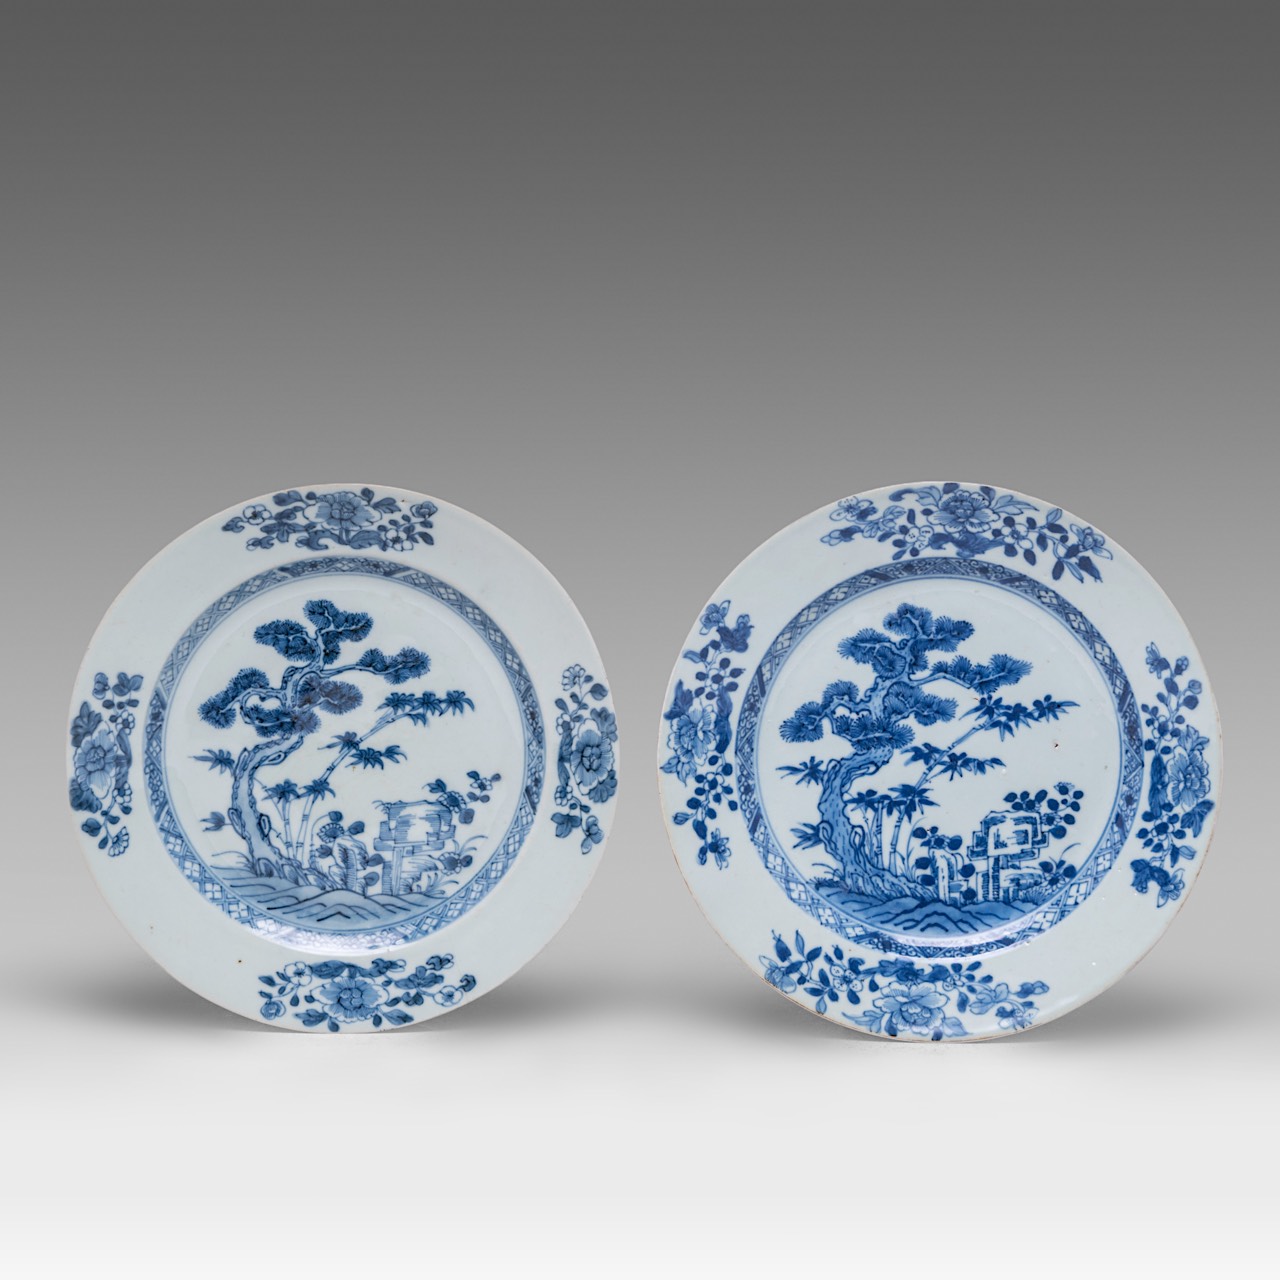 A series of four Chinese blue and white 'Bamboo below Pine' dishes and plates, 18thC, dia 22,5 - 28, - Image 8 of 12